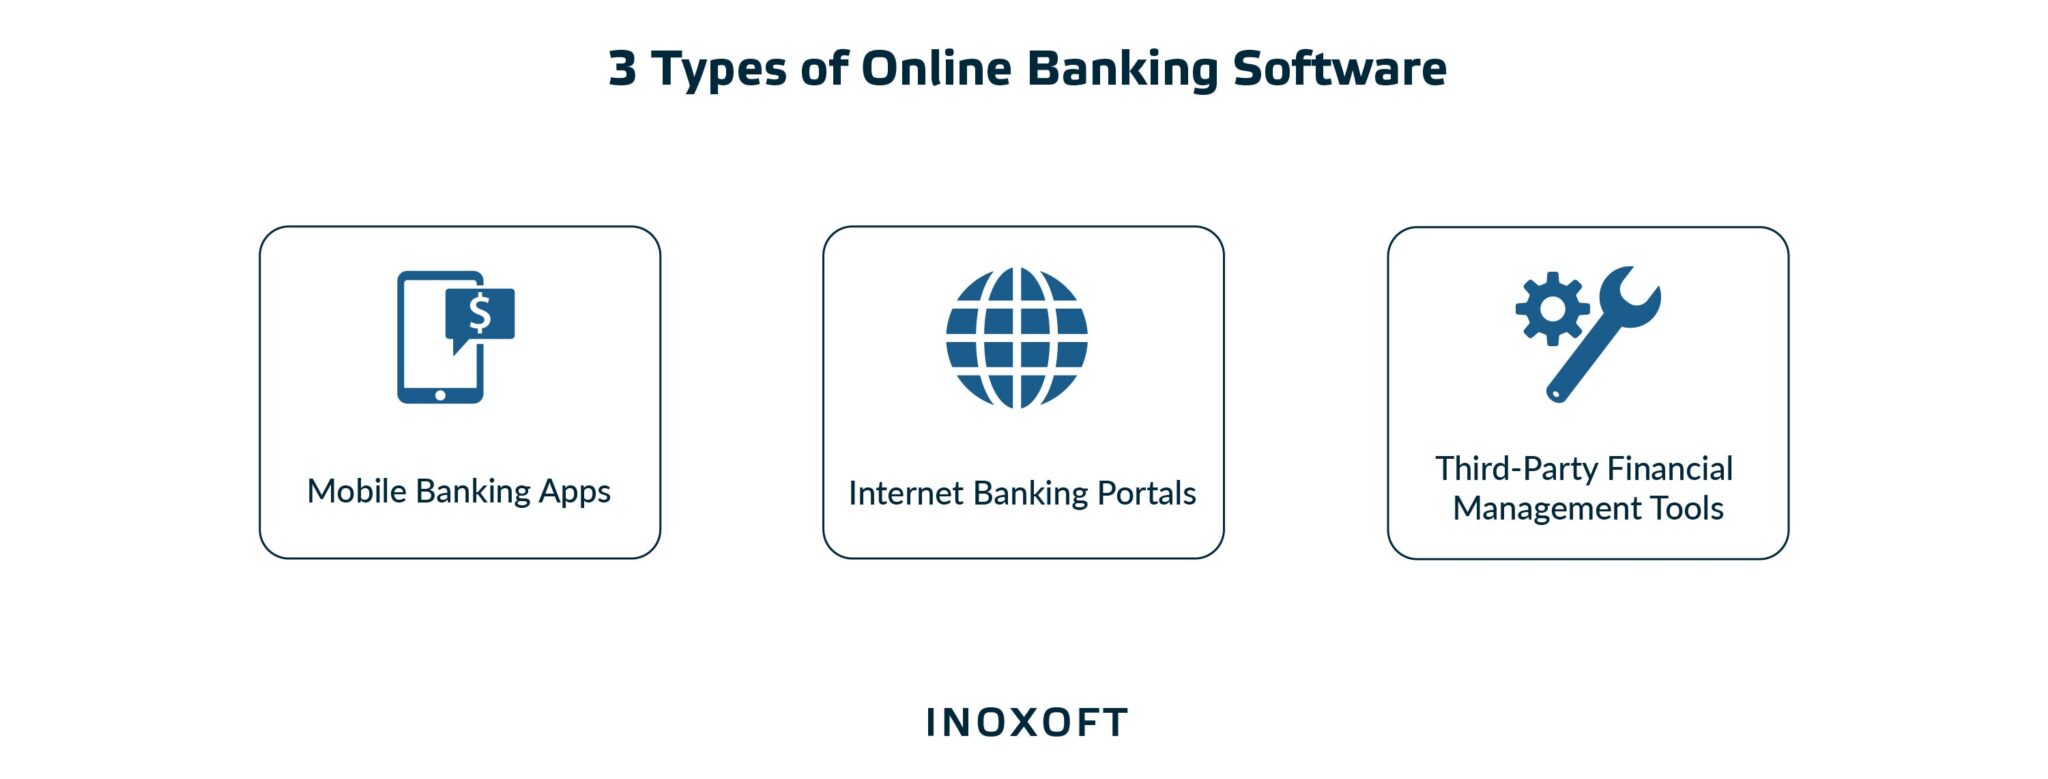 3 Types of Online Banking Software